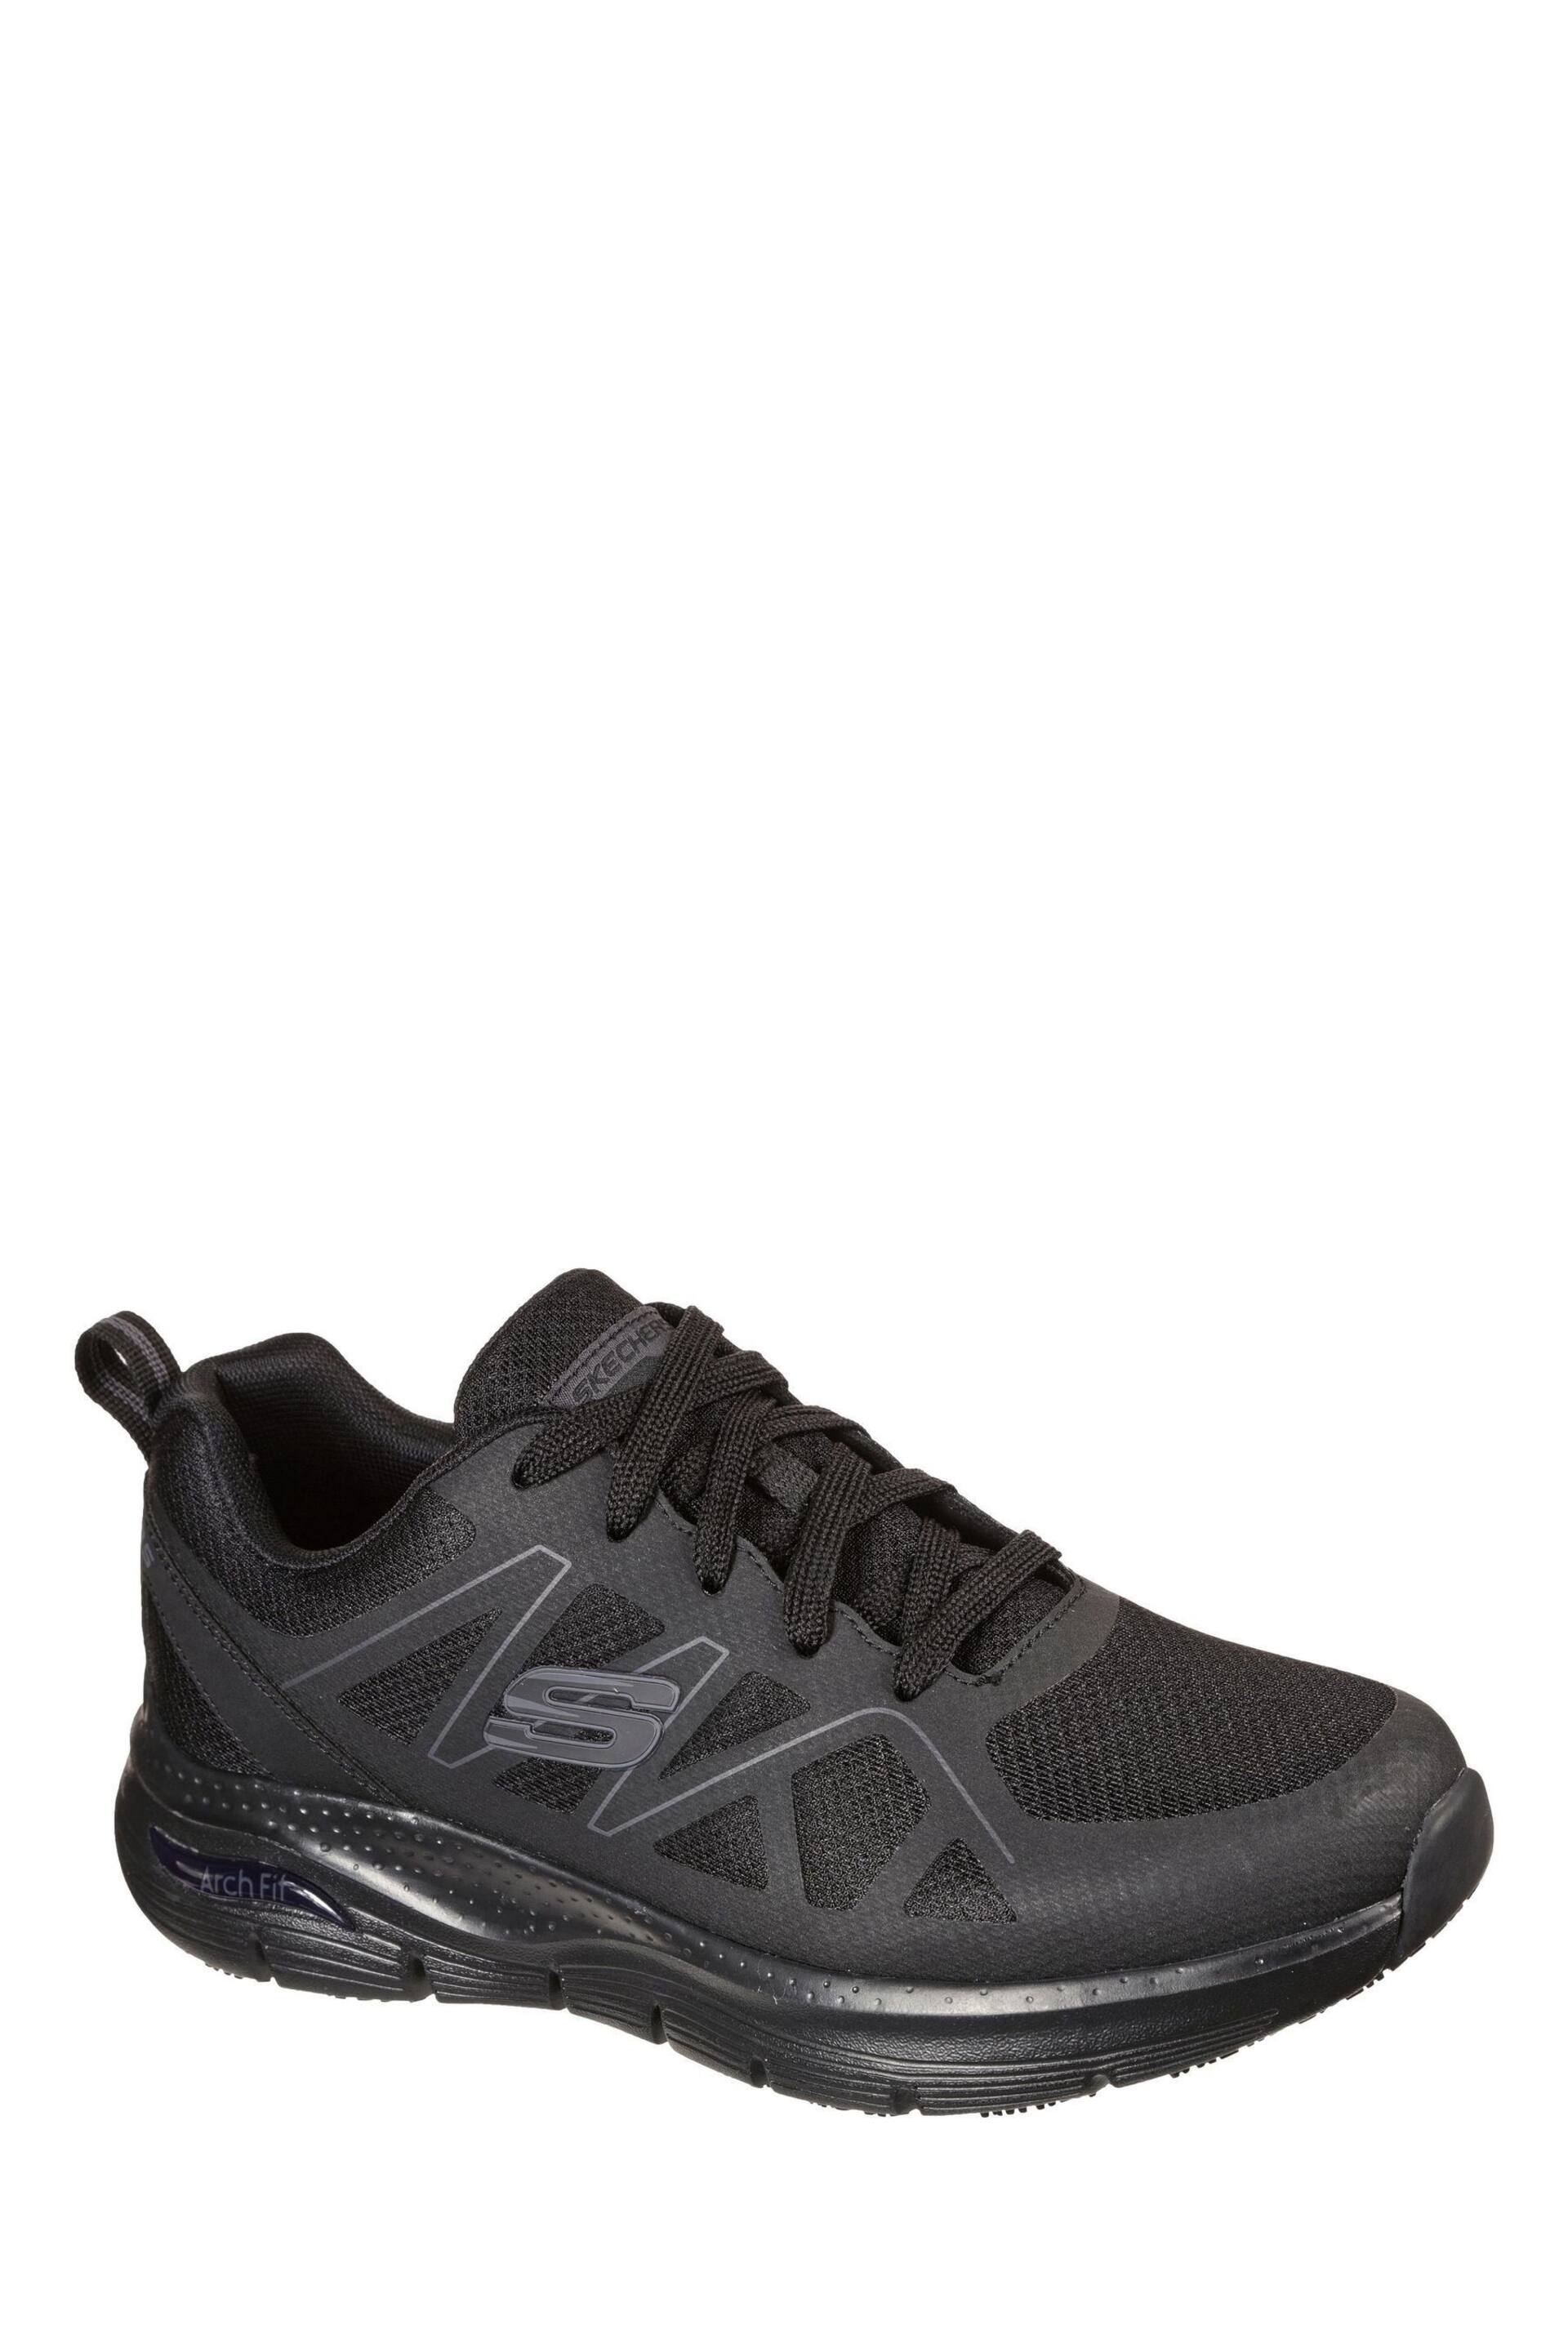 Skechers Black Arch Fit Axtell Slip Resistant Mens  Trainers - Image 3 of 5